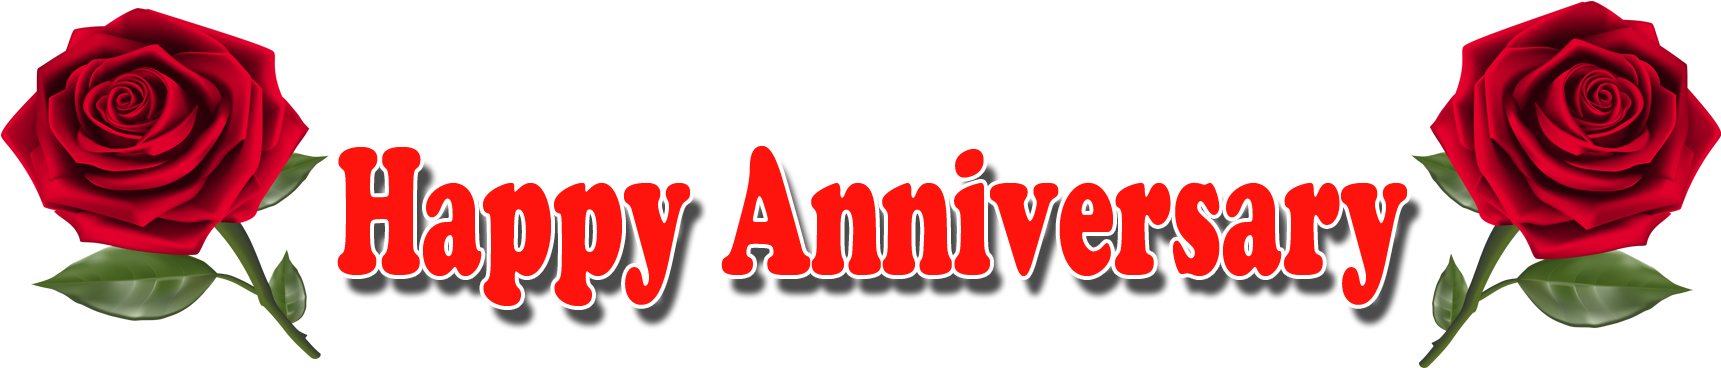 Happy Anniversary Red Roses Banner PNG image